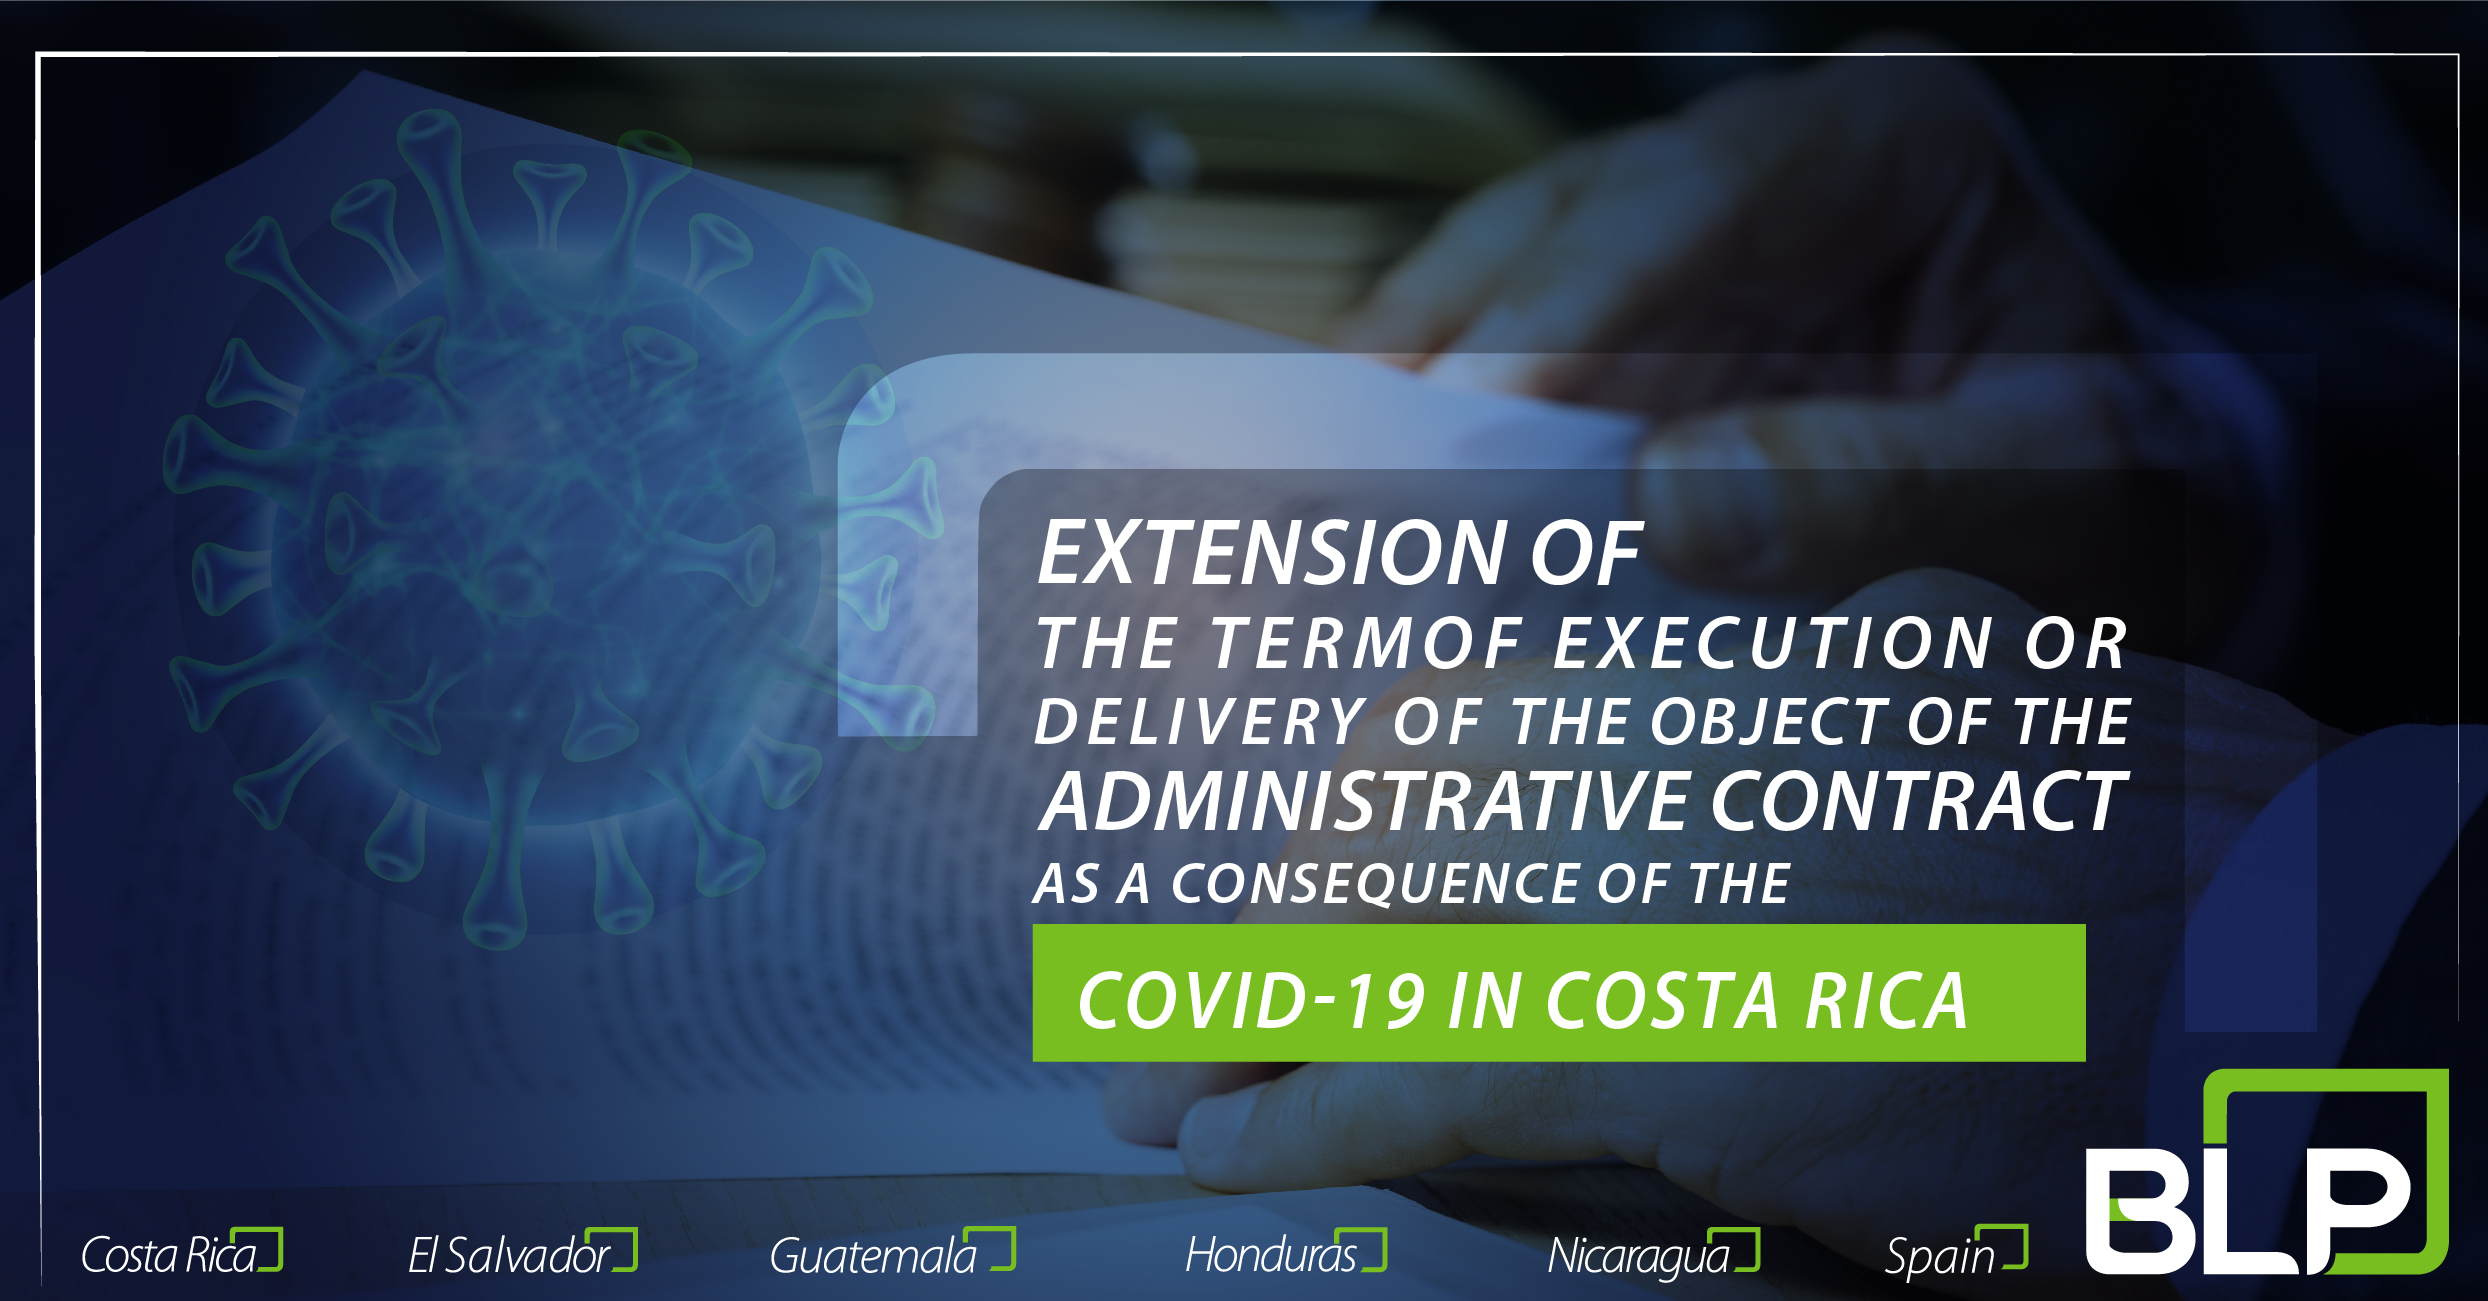 Extension of the term of execution or delivery of the object of the administrative contract as a consequence of the COVID-19 pandemic.